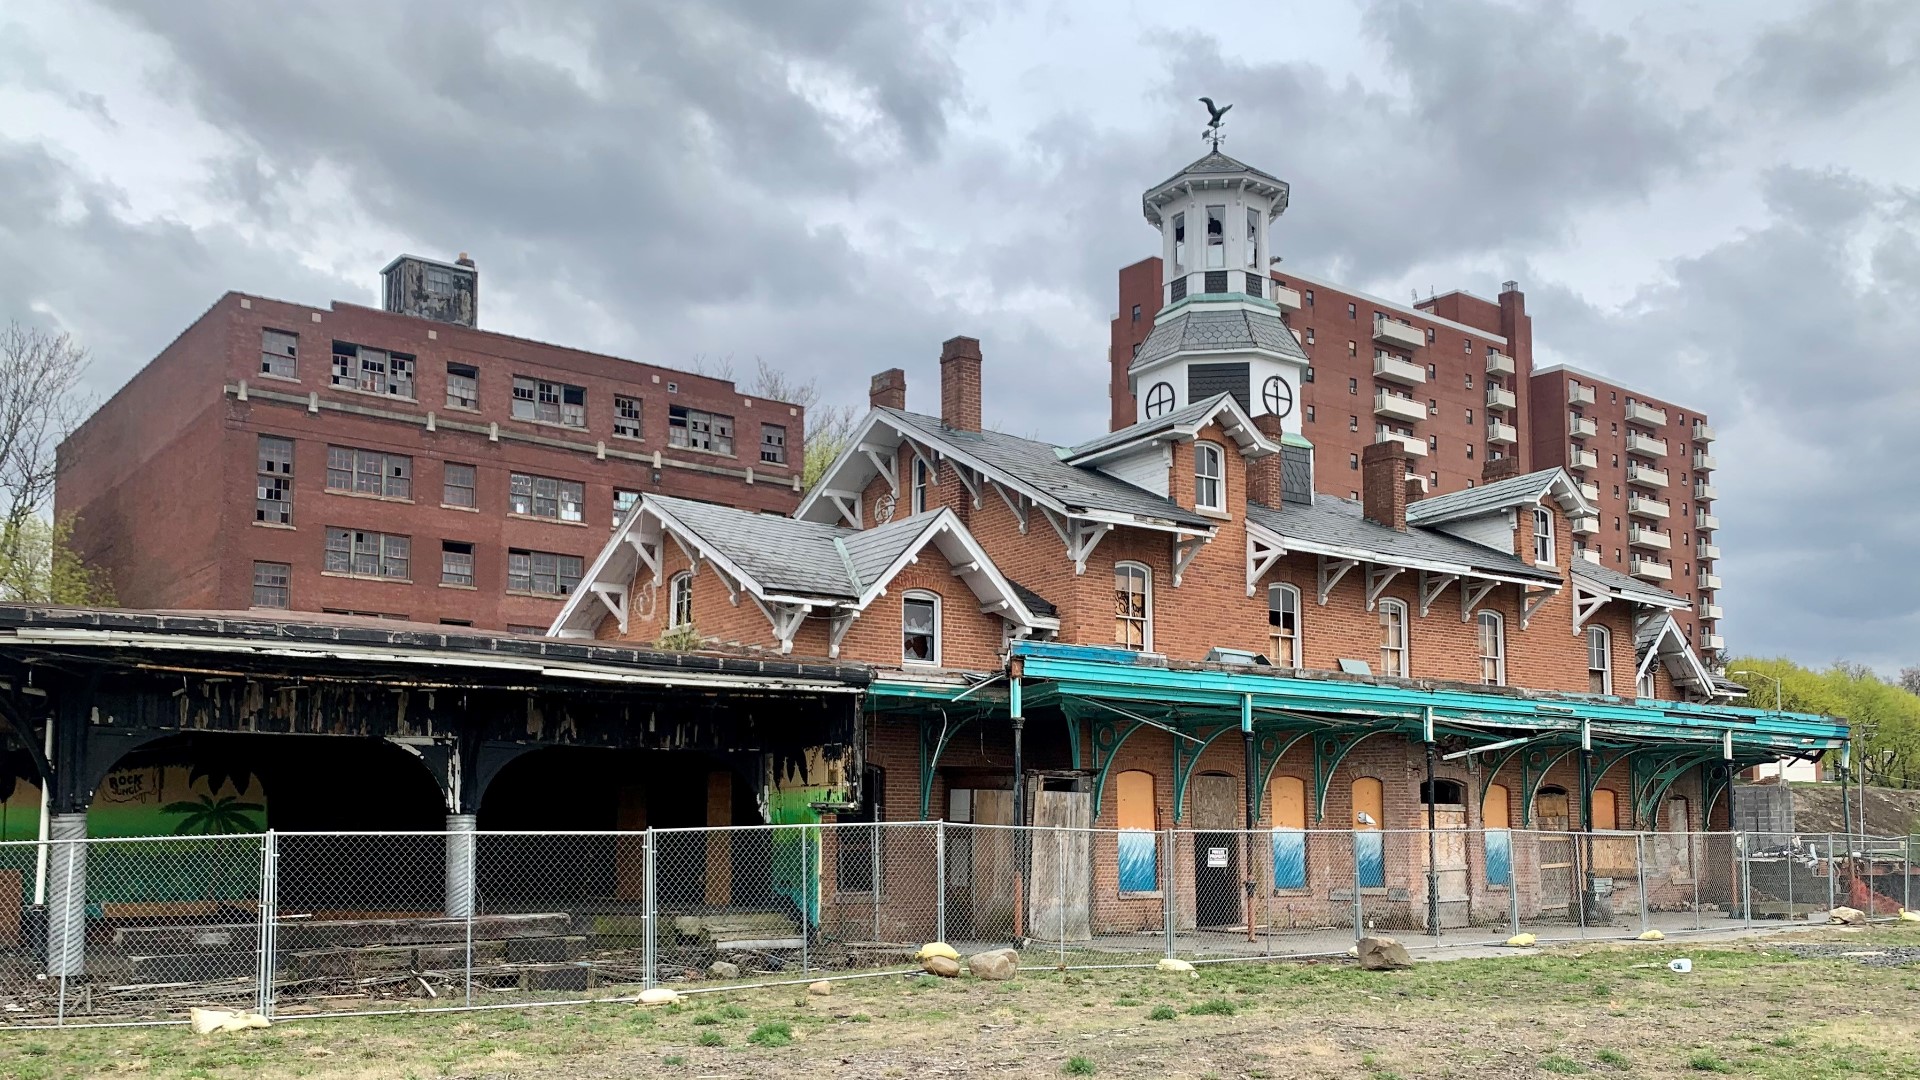 Visit Luzerne County plans to have a new home by 2022—the historic train station along Wilkes-Barre Boulevard.